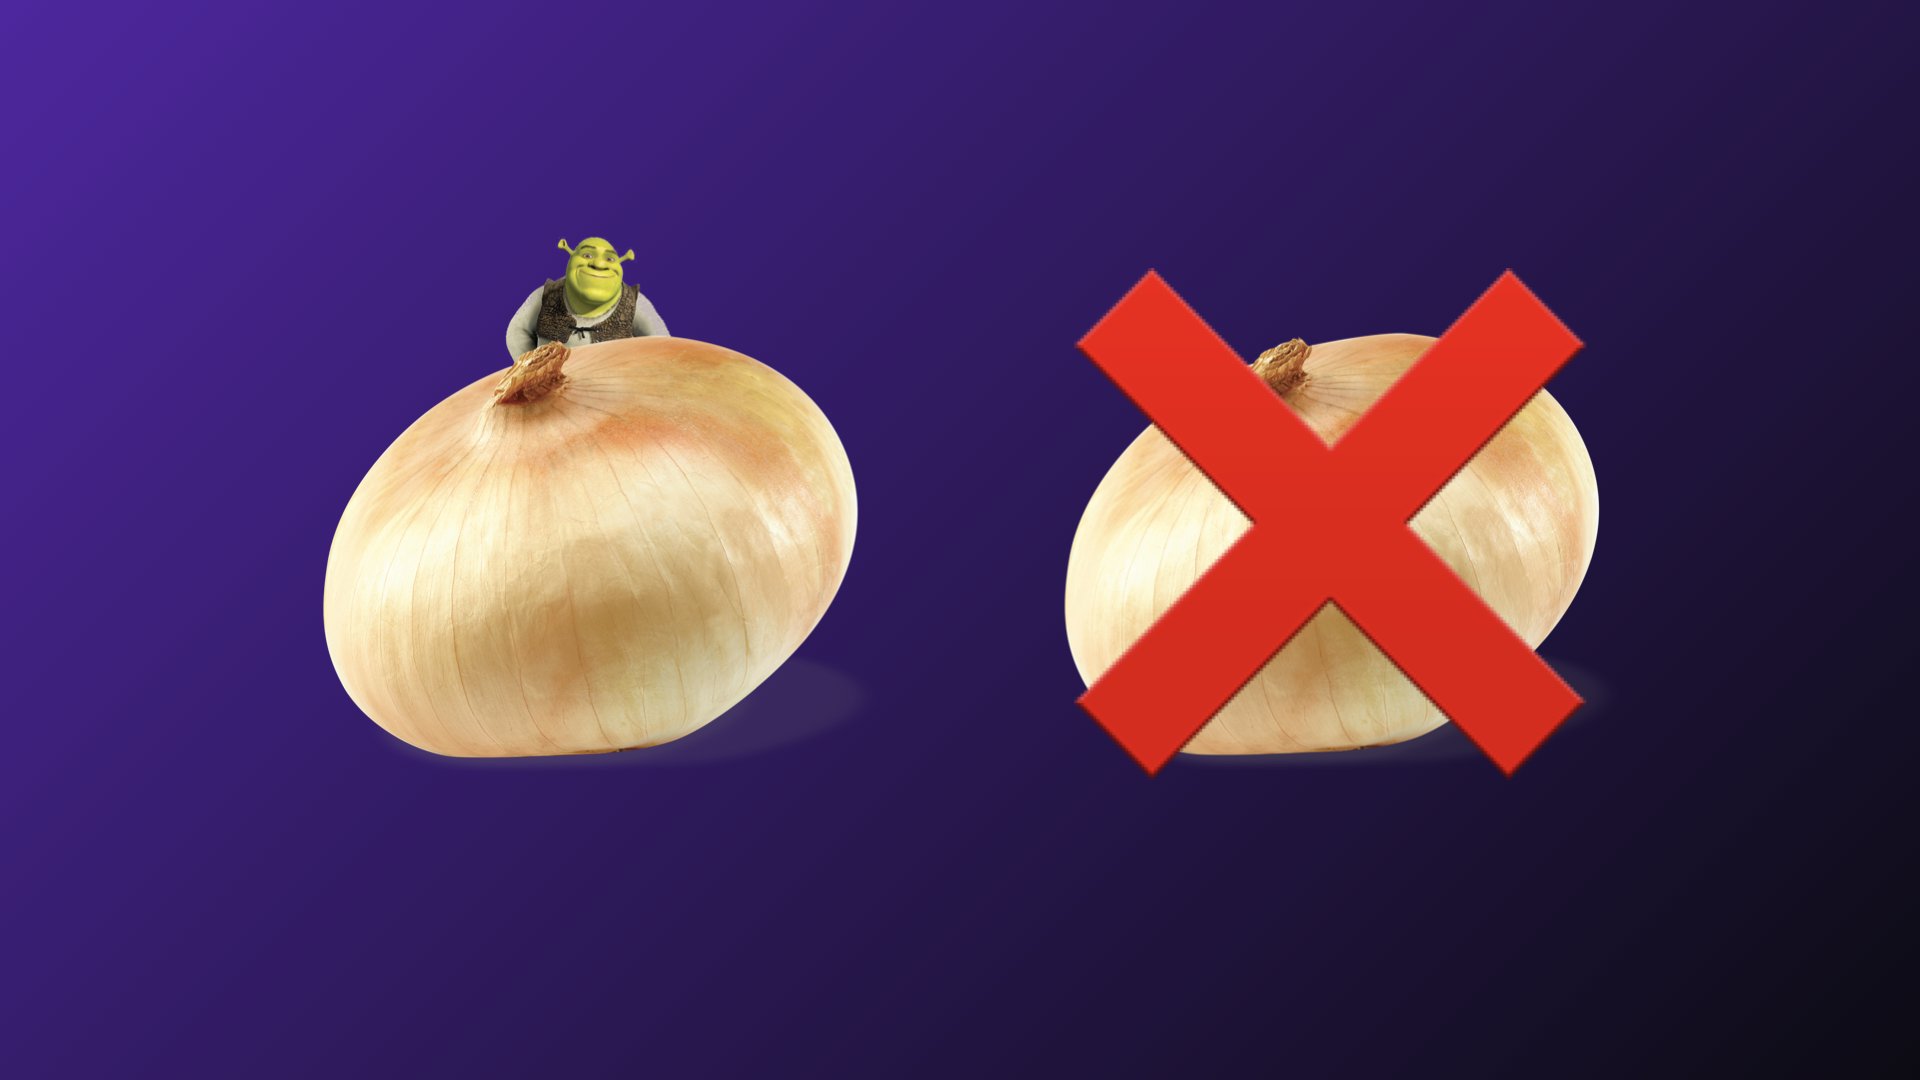 An onion and an onion with an X over it. An onion is a visual metaphor for layered Docker images.